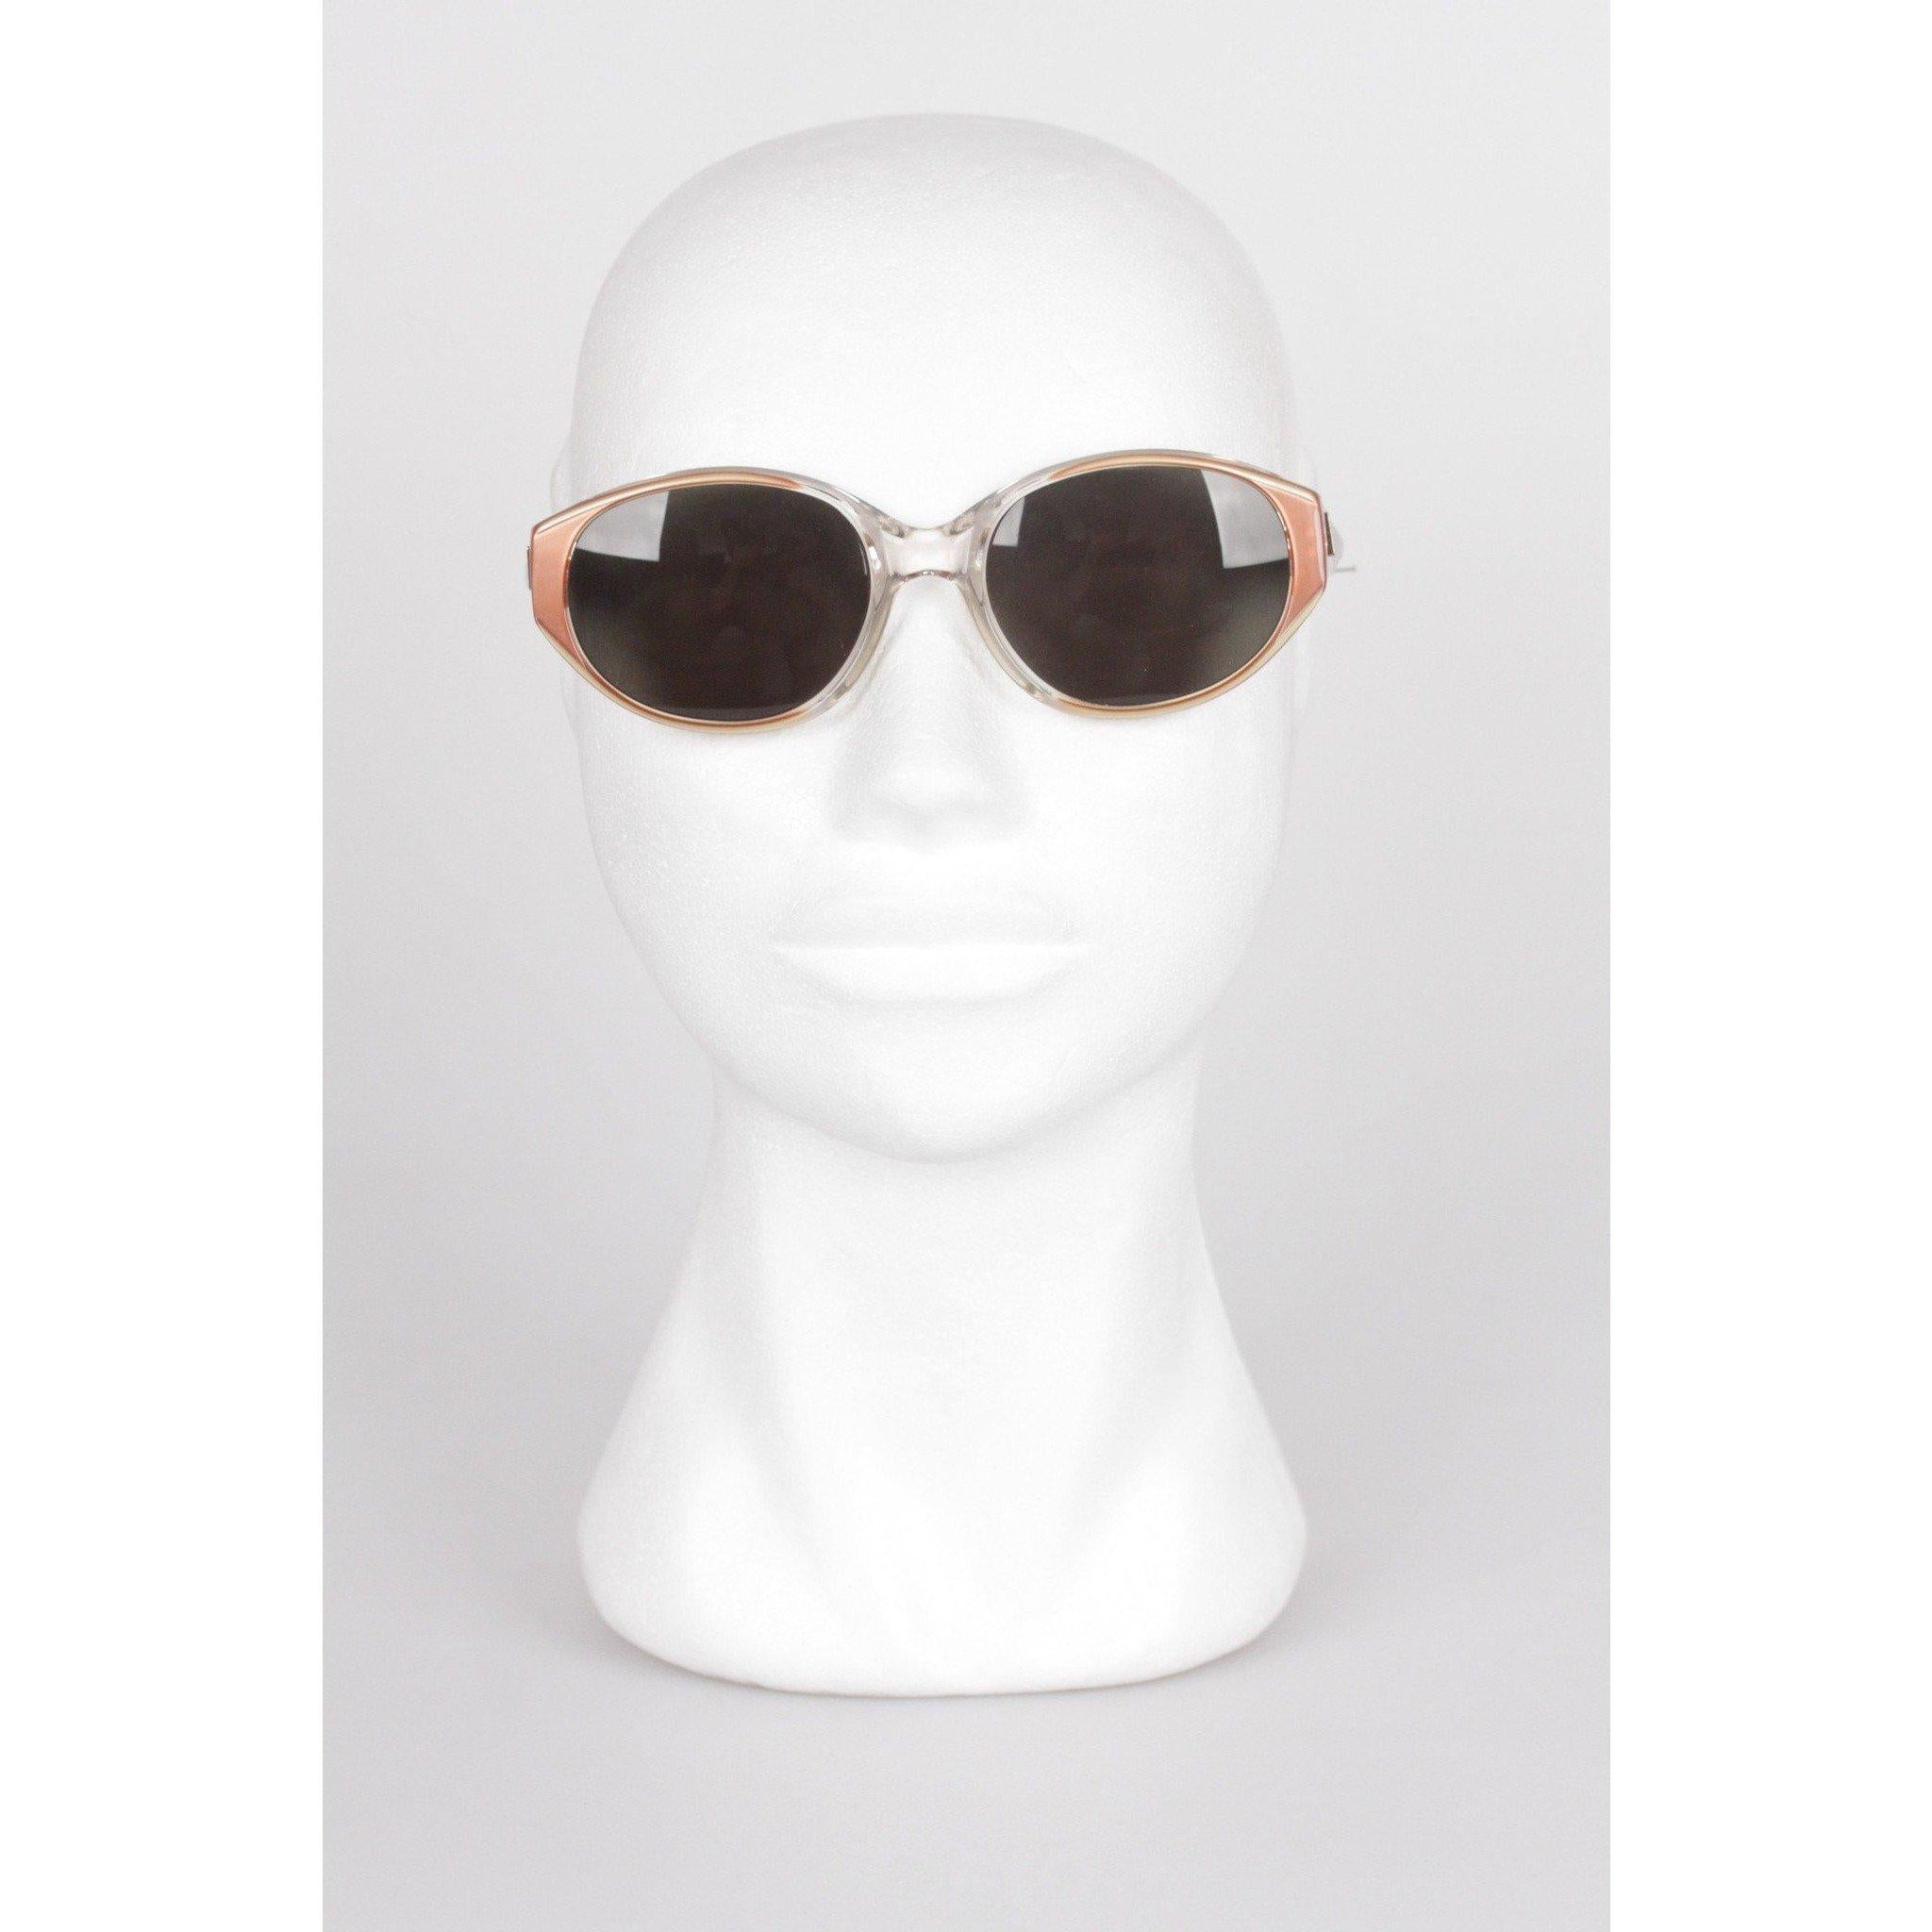 - Vintage sunglasses by YVES SAINT LAURENT from the 80s - Oval design - Mod. ARGOS 56/18 - 145 - 796 - Tan & Clear plastic frame - Gold metal YSL logo on temples - Mint green lenses - 100% UV protection Any other detail which is not mentioned may be